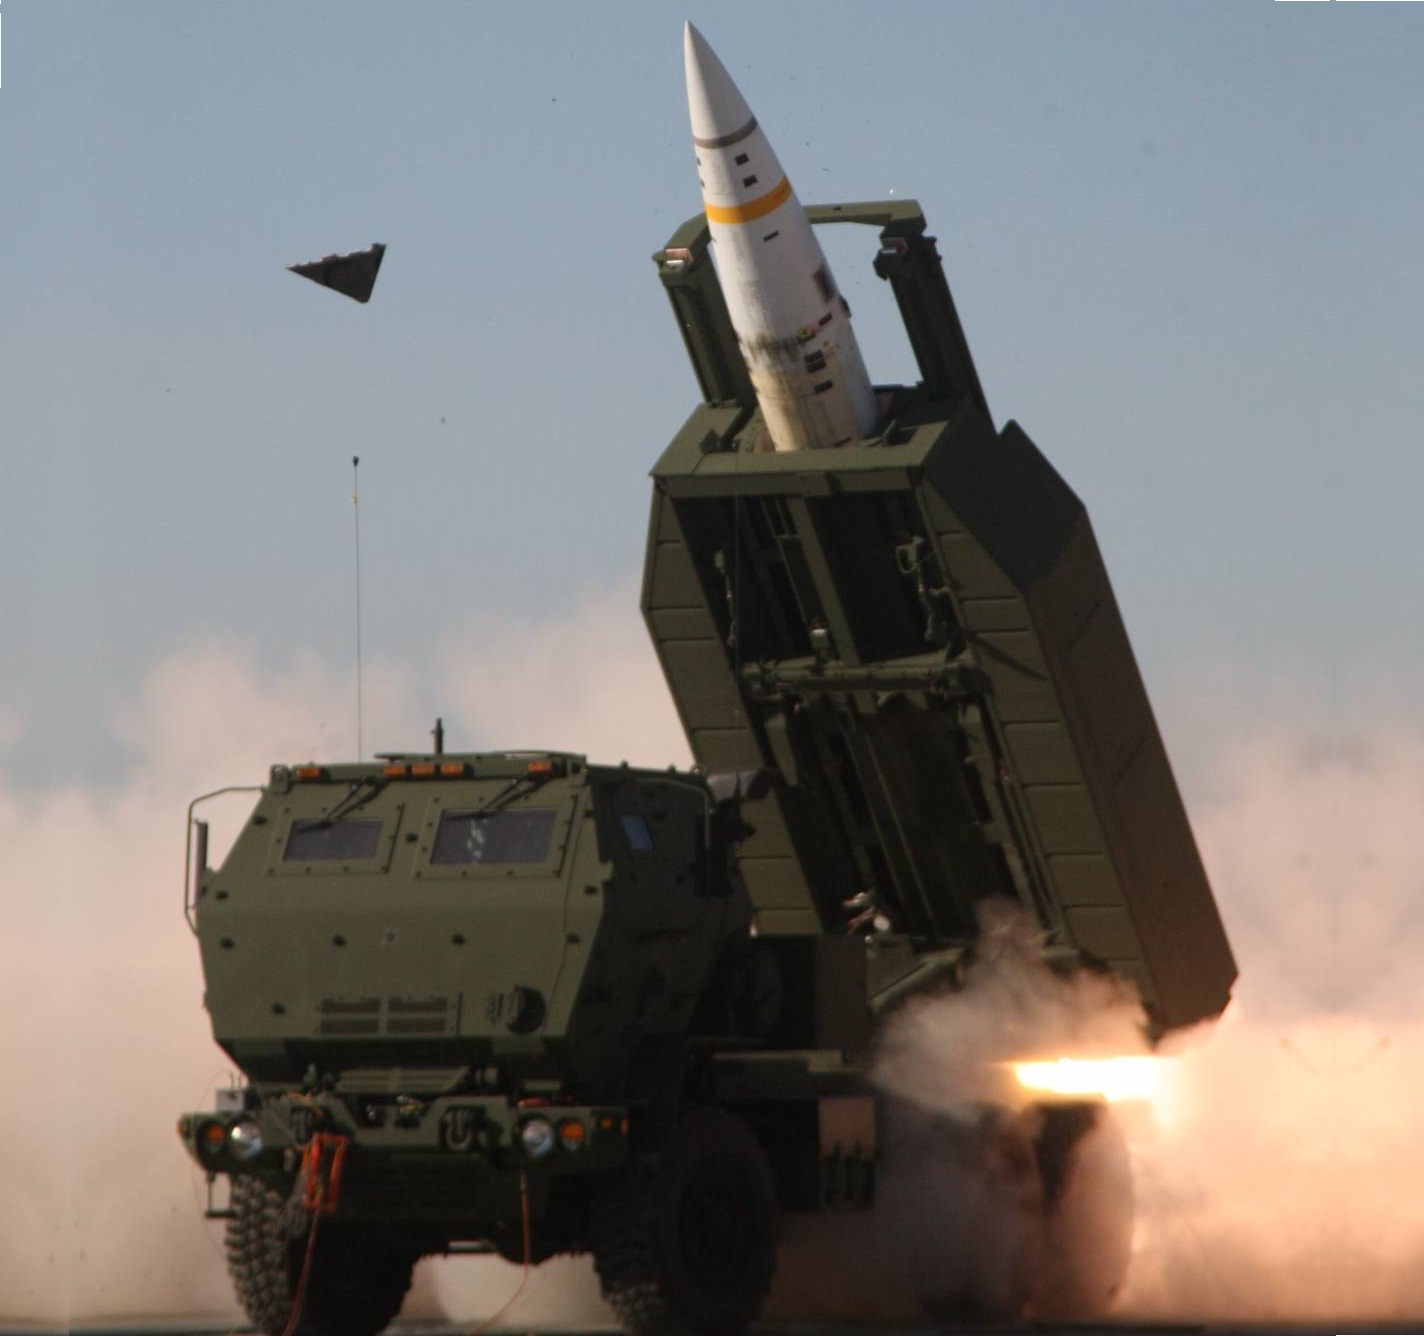 An Army Tactical Missile System (ATACMS) being launched by a M142